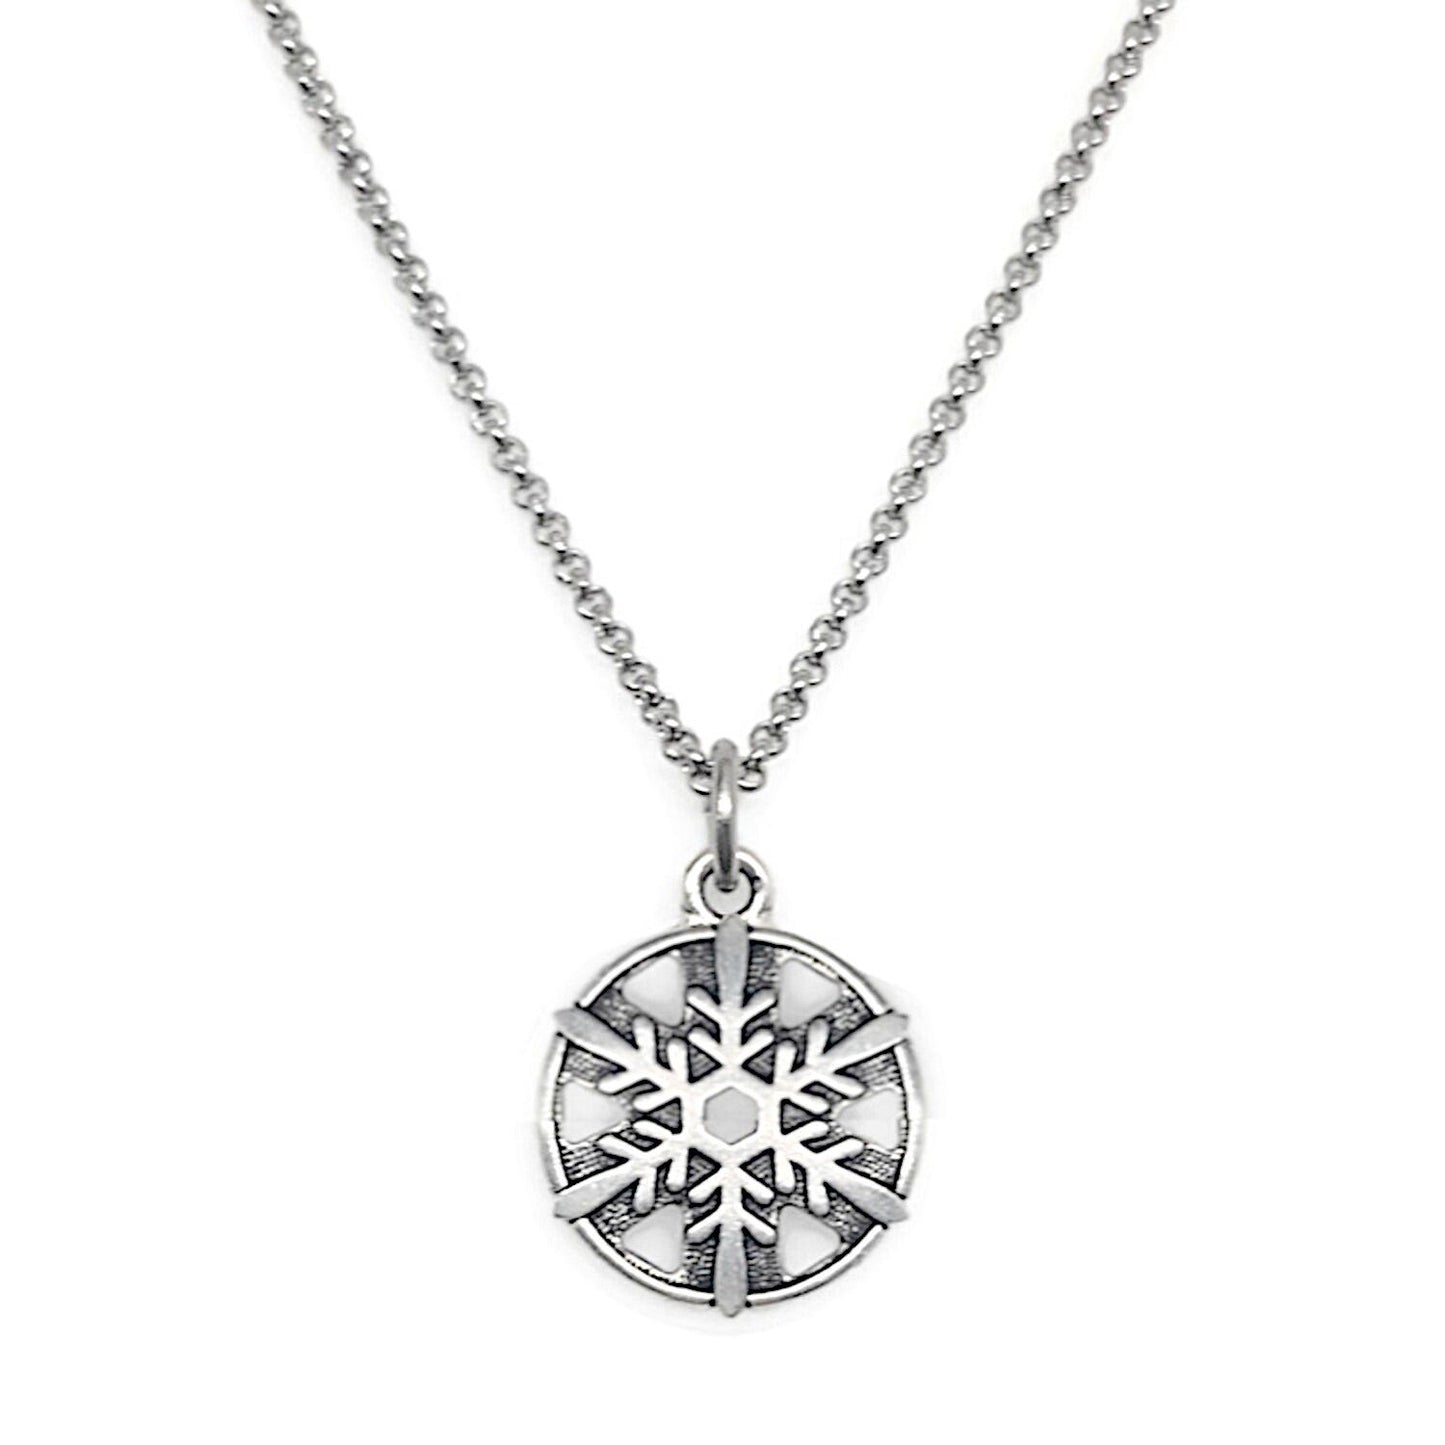 Small Antique Silver Snowflake Charm Necklace, Winter Gifts for Women, Round Pendant, Stainless Steel Necklace Chain